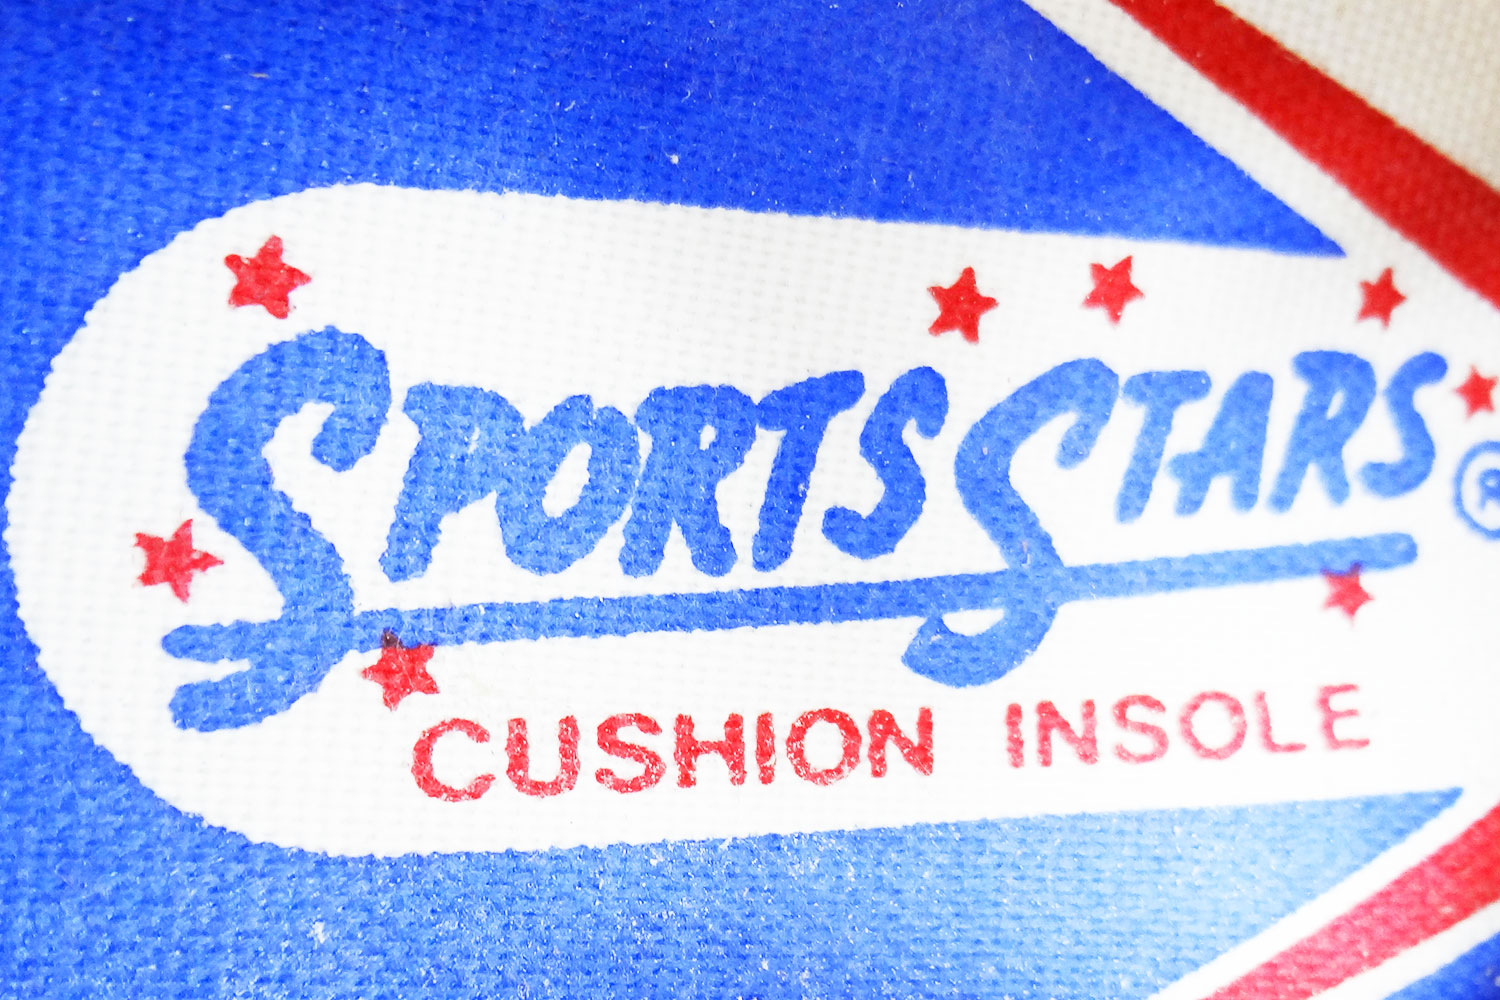 Rare Sports Stars vintage sneakers insole logo detail @ The Deffest